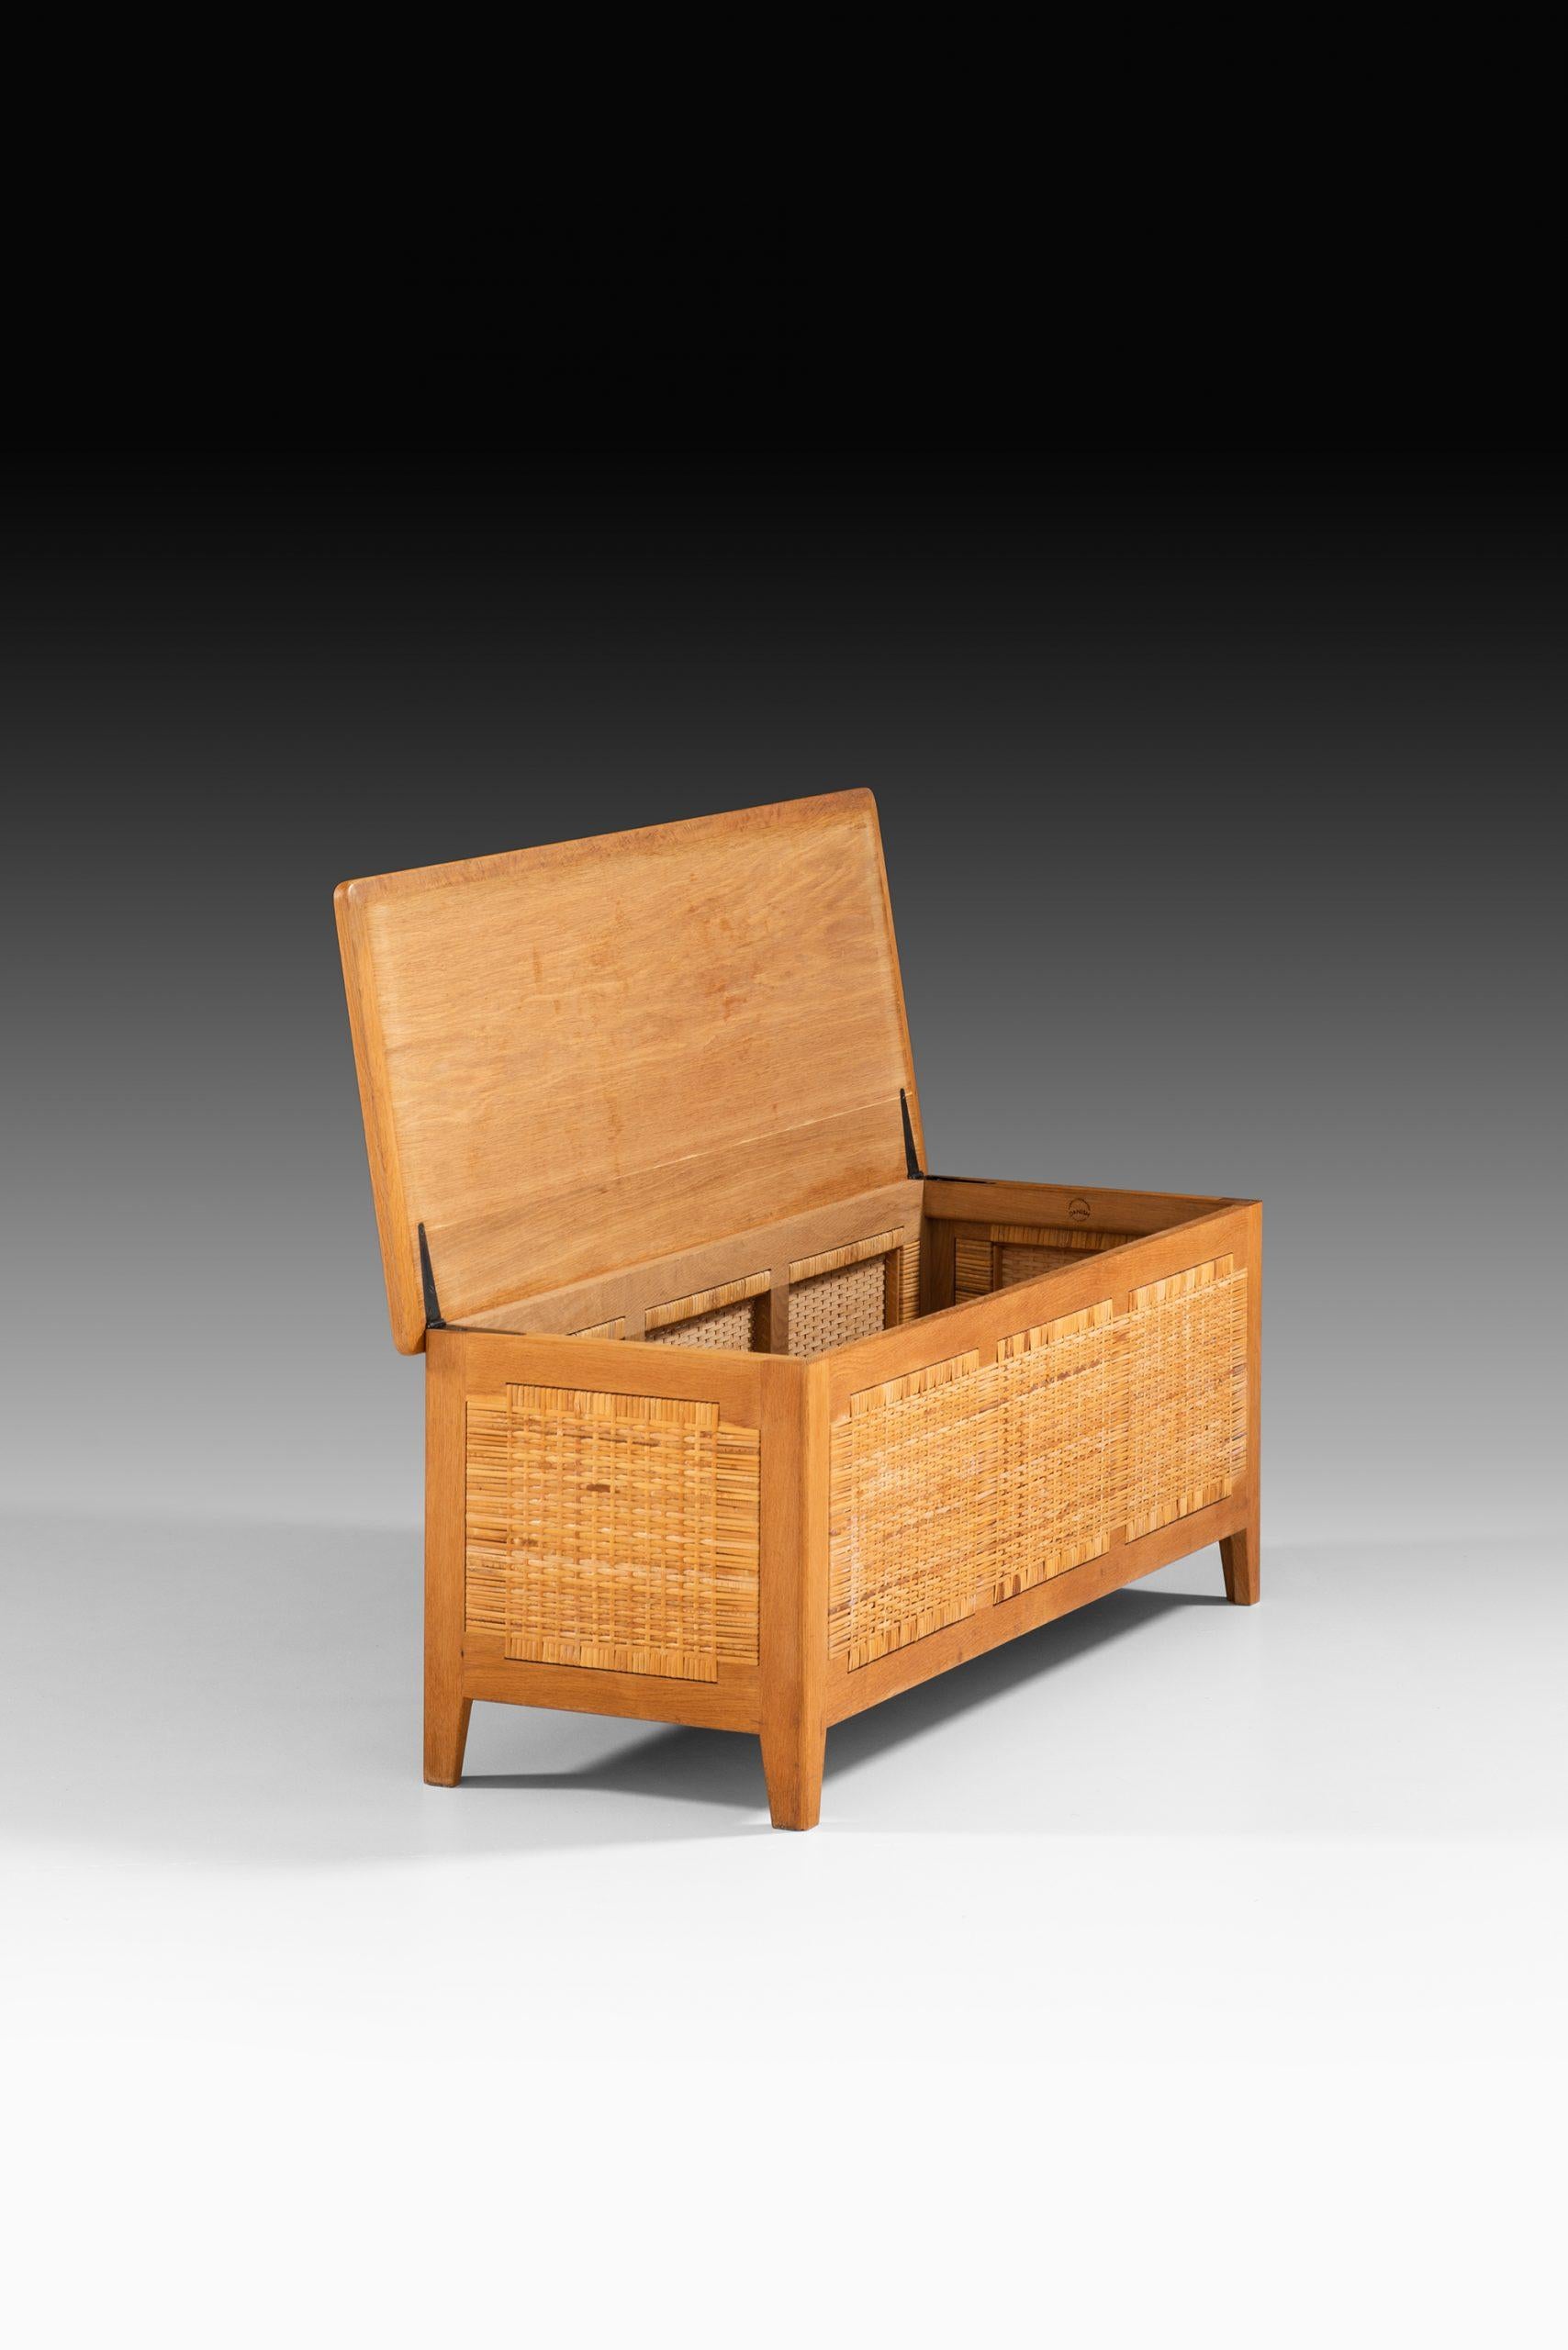 Cane Kai Winding Chest / Bench Produced by Poul Hundevad in Denmark For Sale